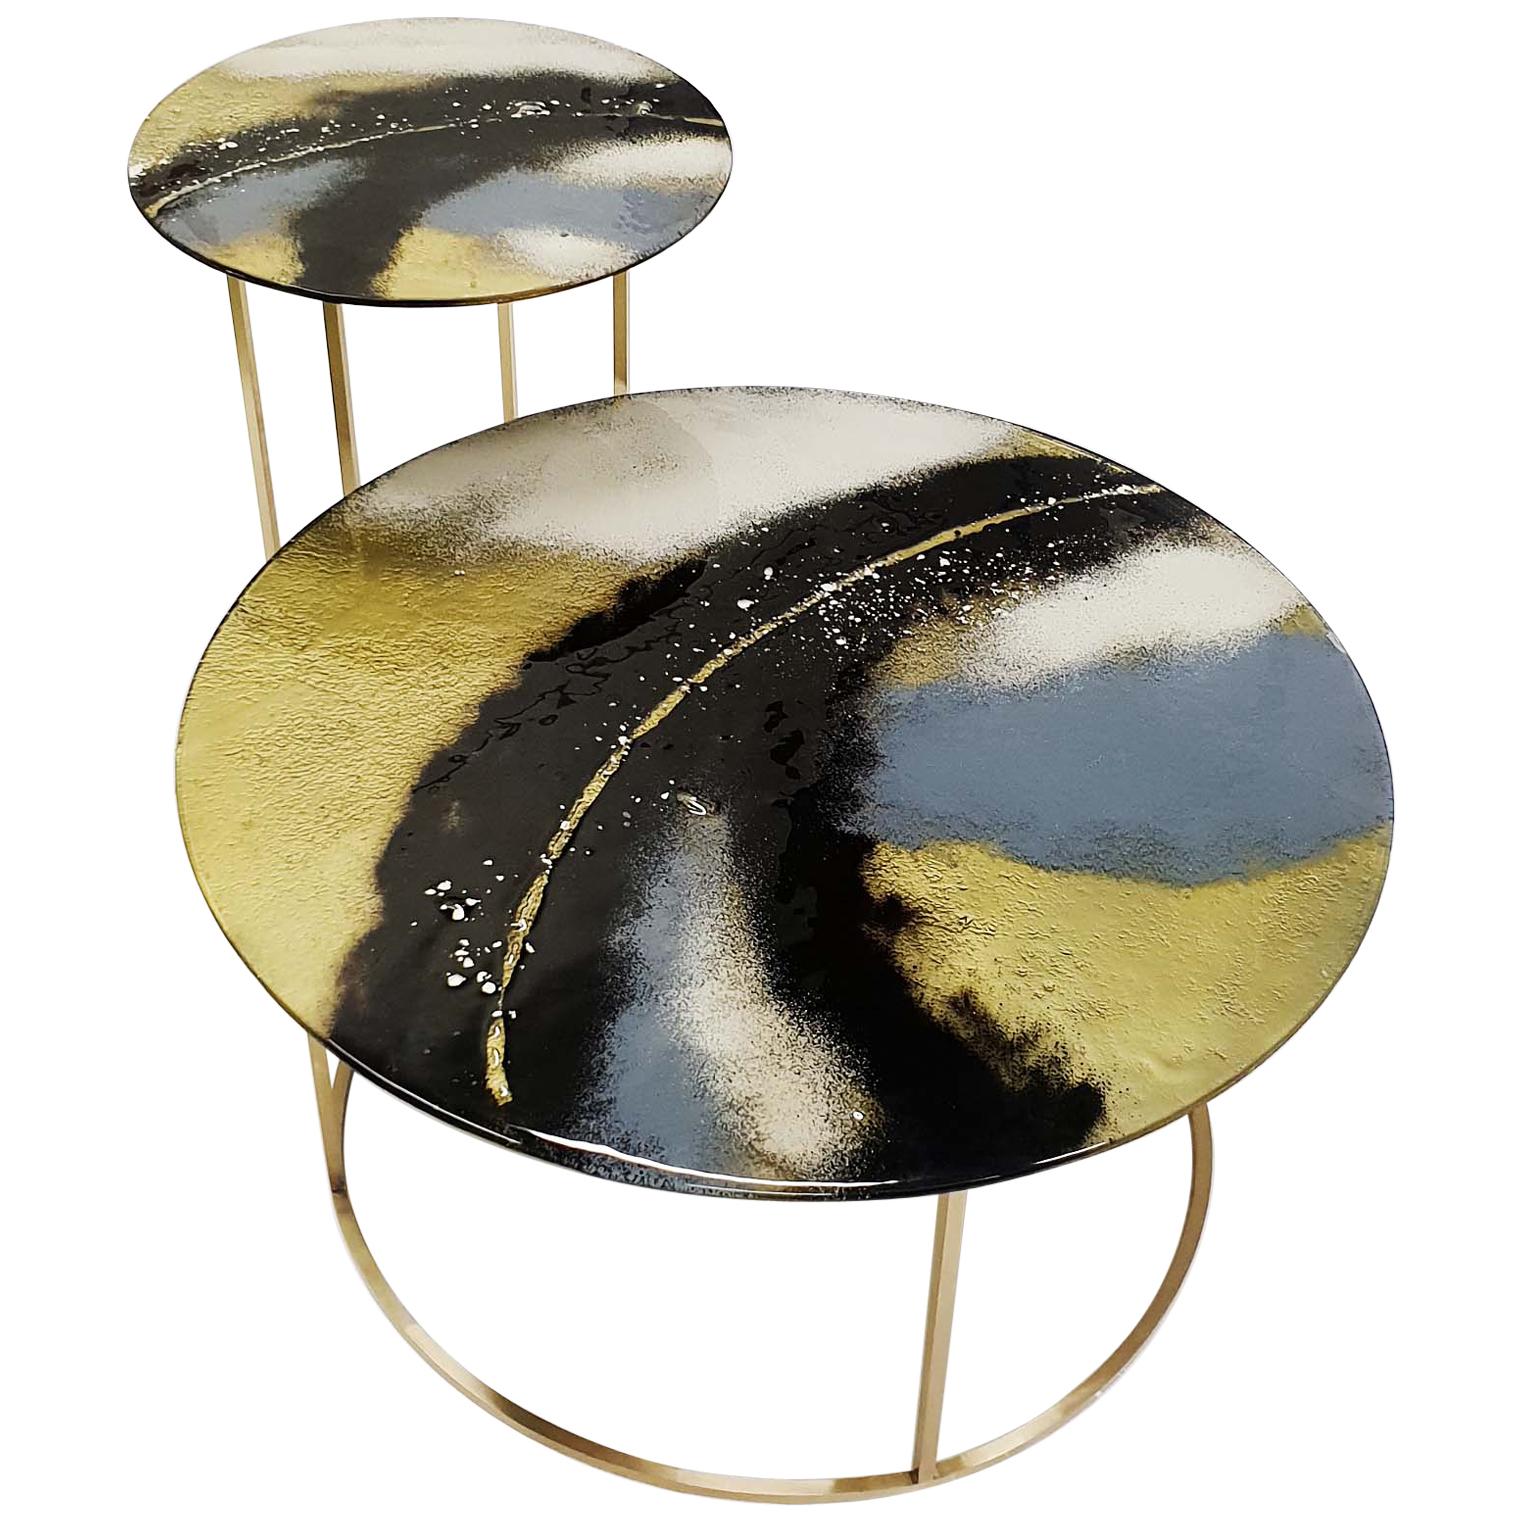 Modern Contemporary Round Coffee Tables Murano Glass in Gold, Black and Grey